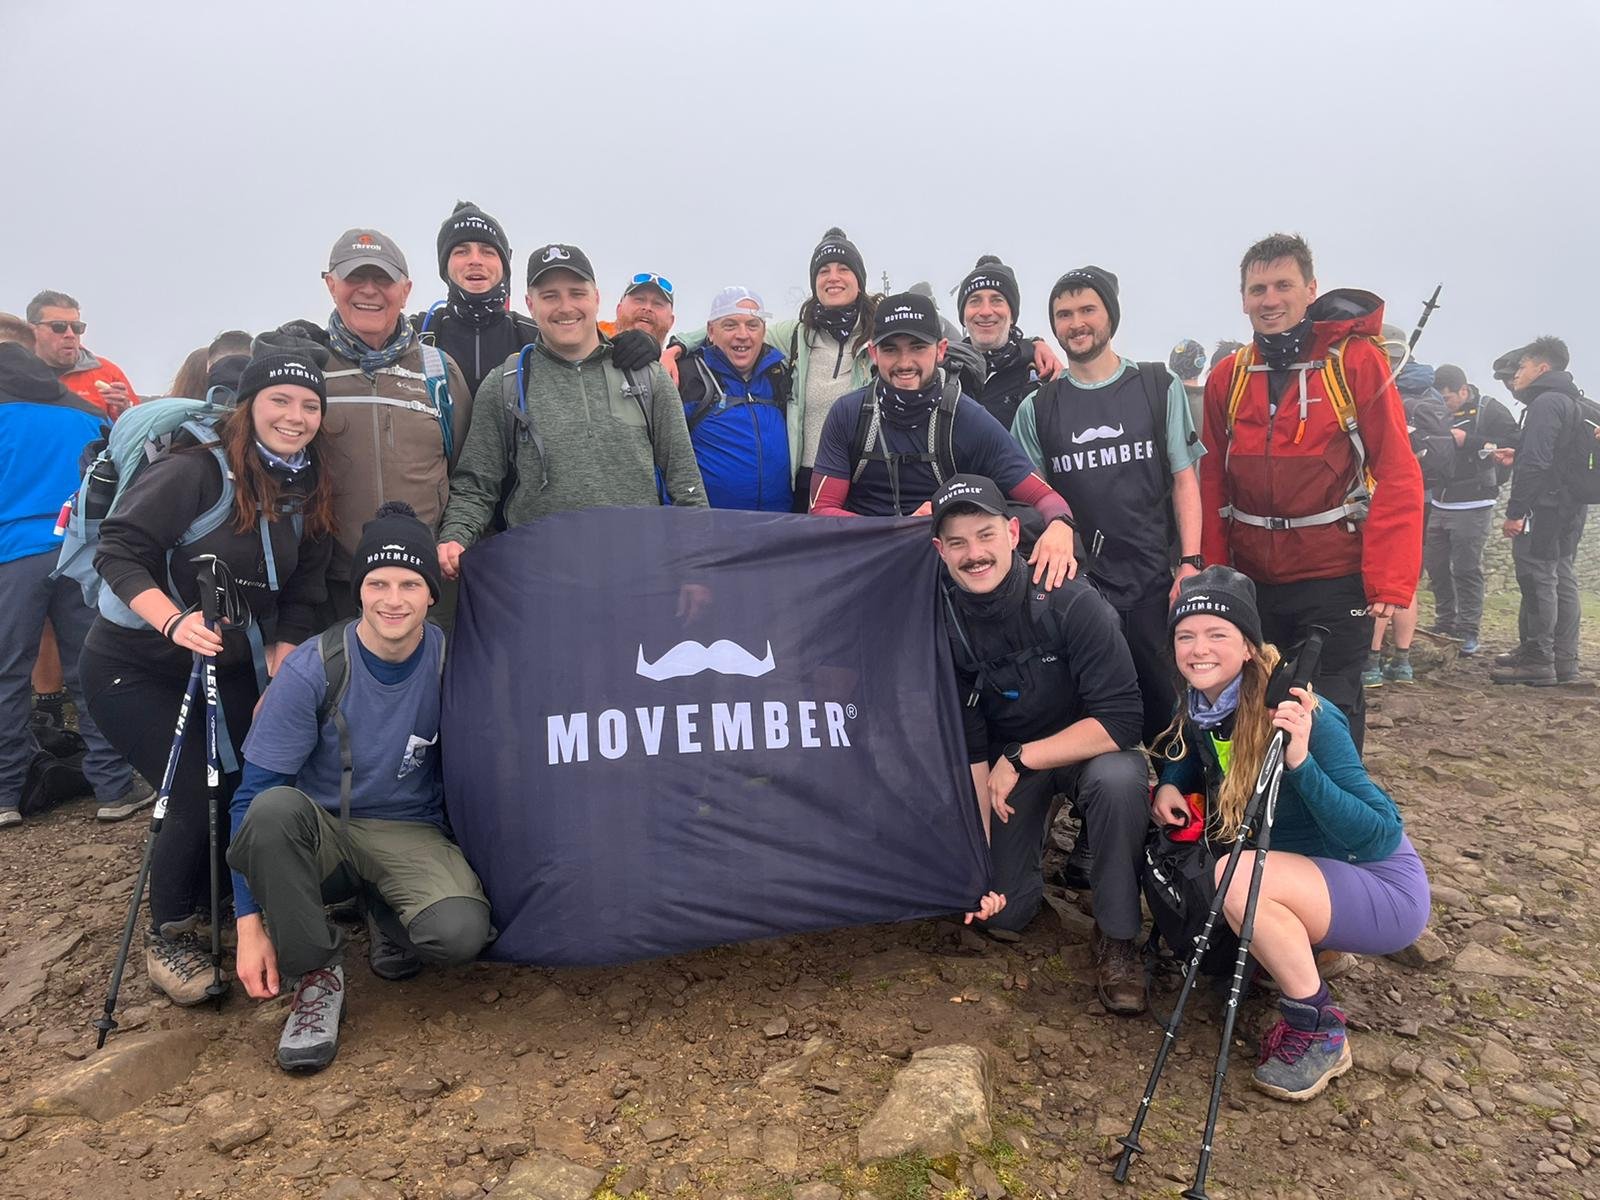 GU Movember Ambassadors fundraise over £2k for the charity